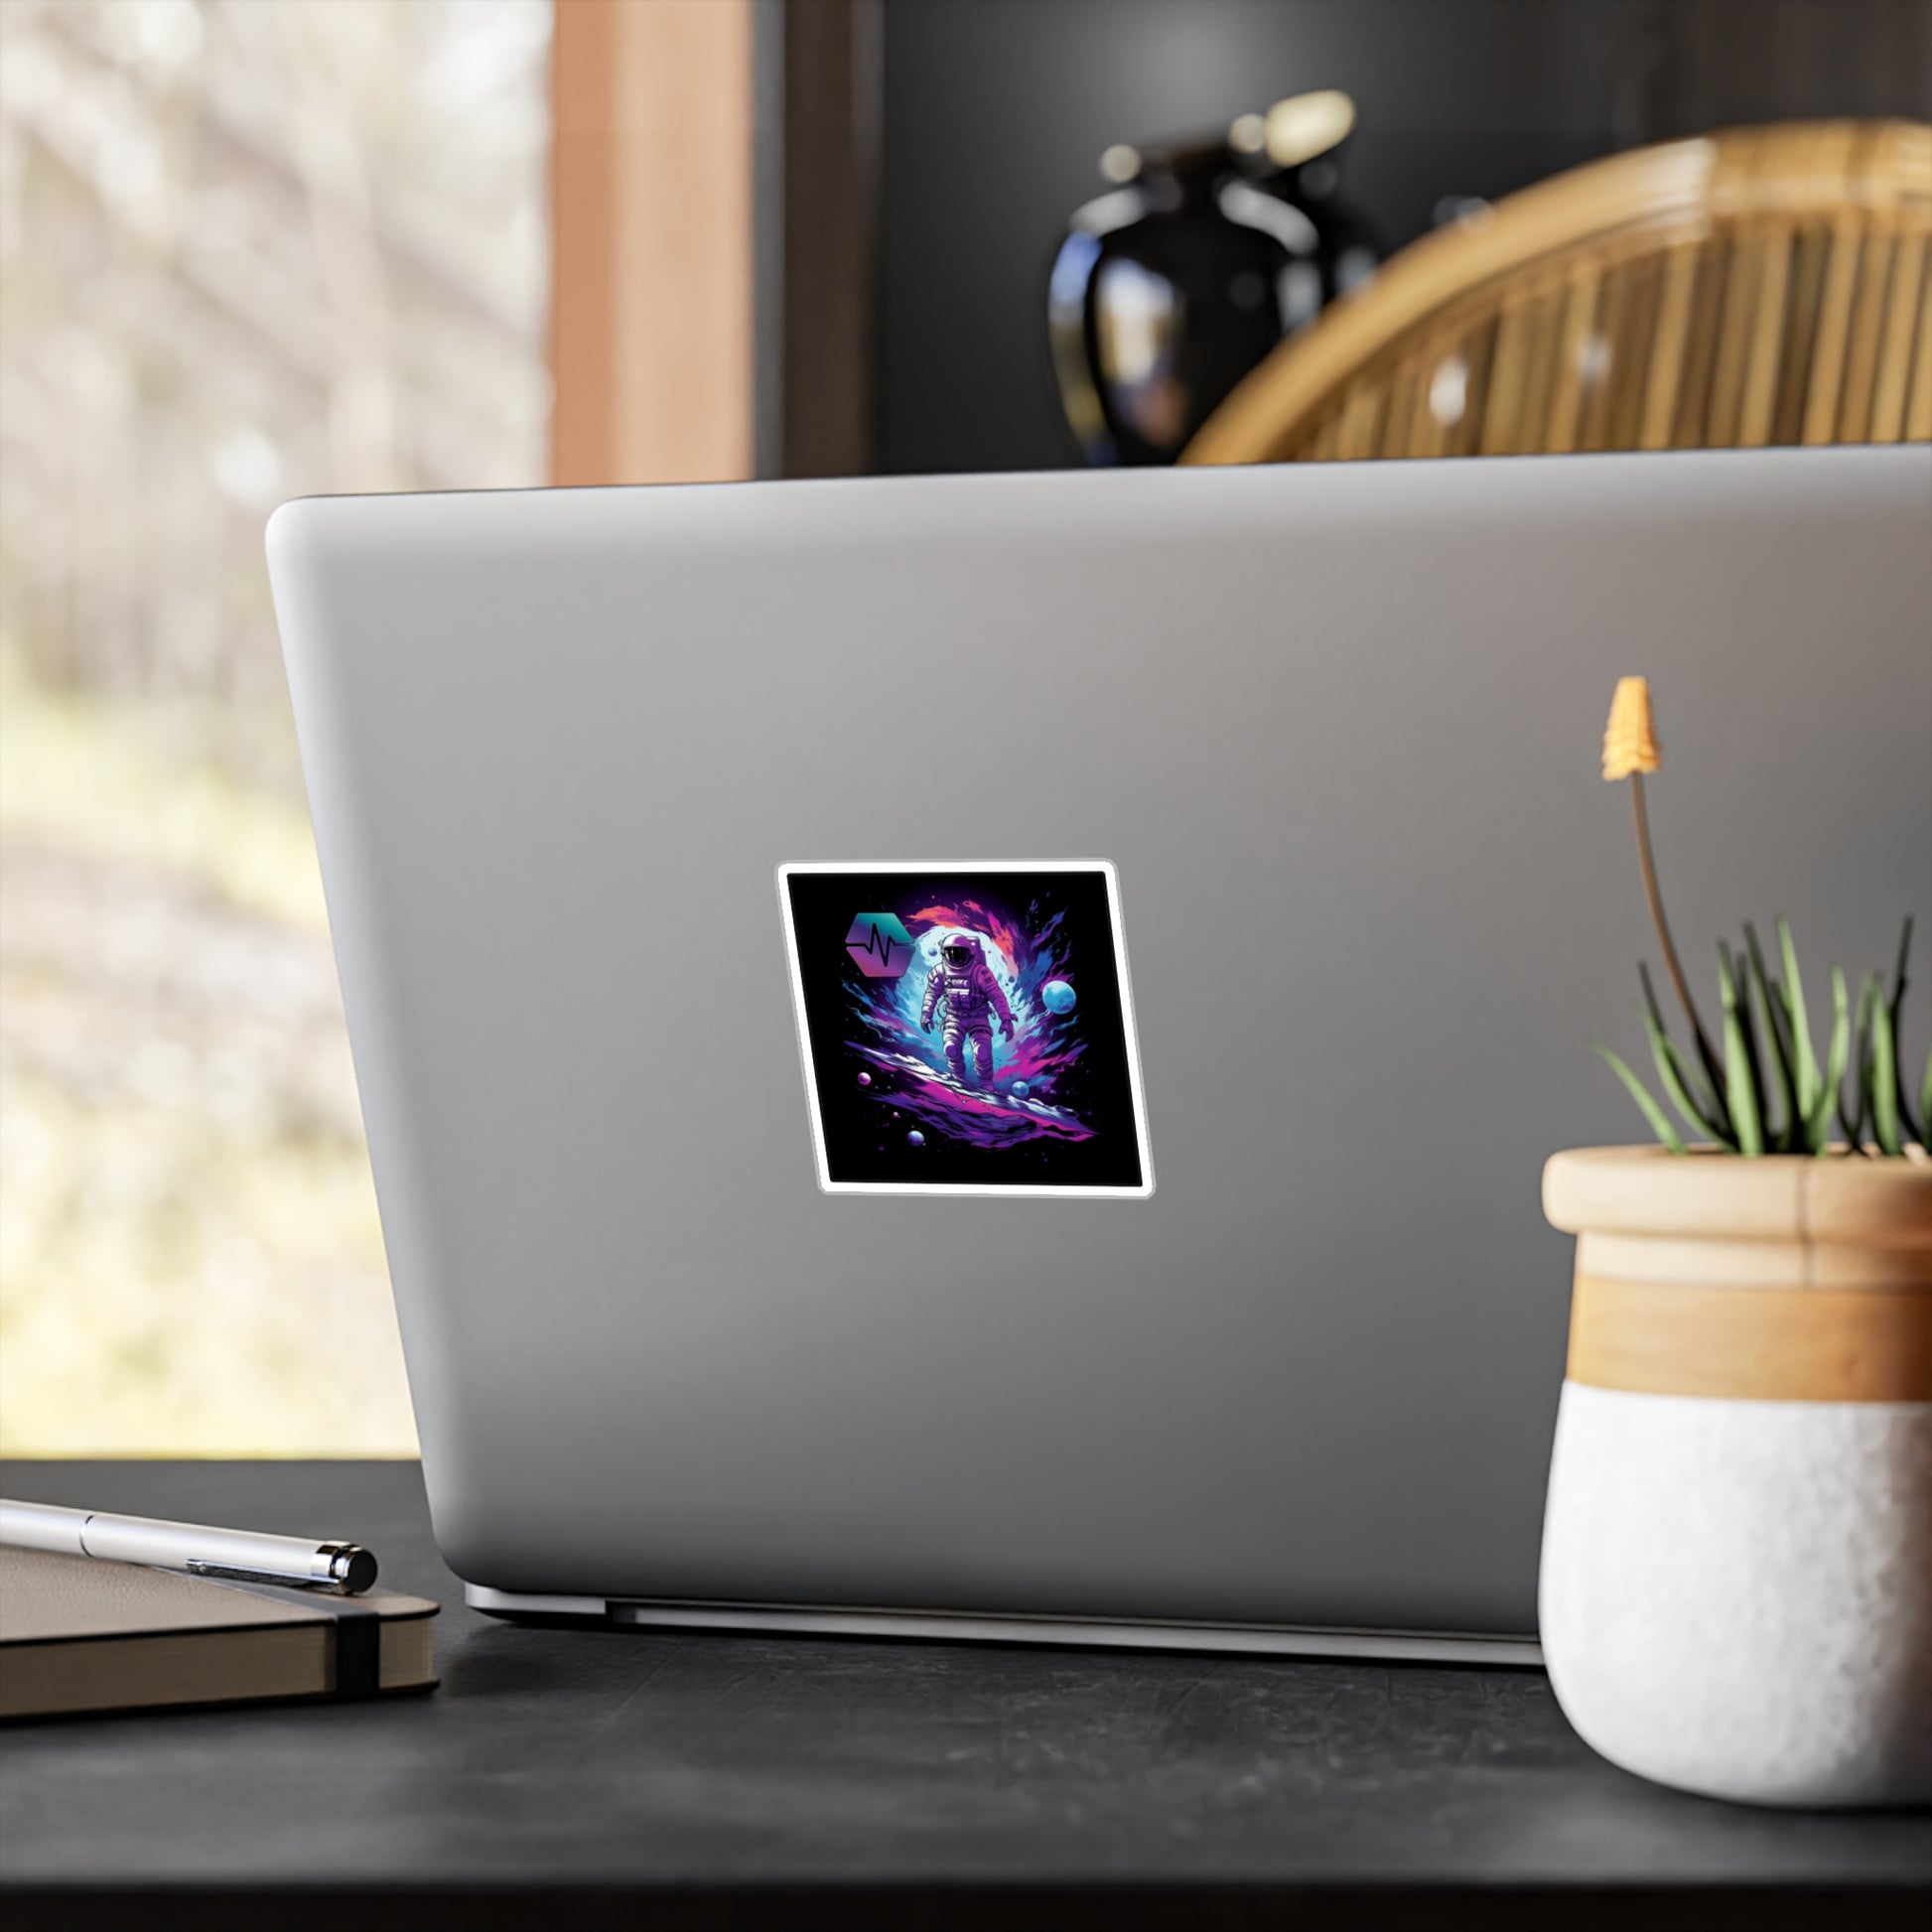 Pulsetronaut Vinyl Decal - DeFi Outfitters